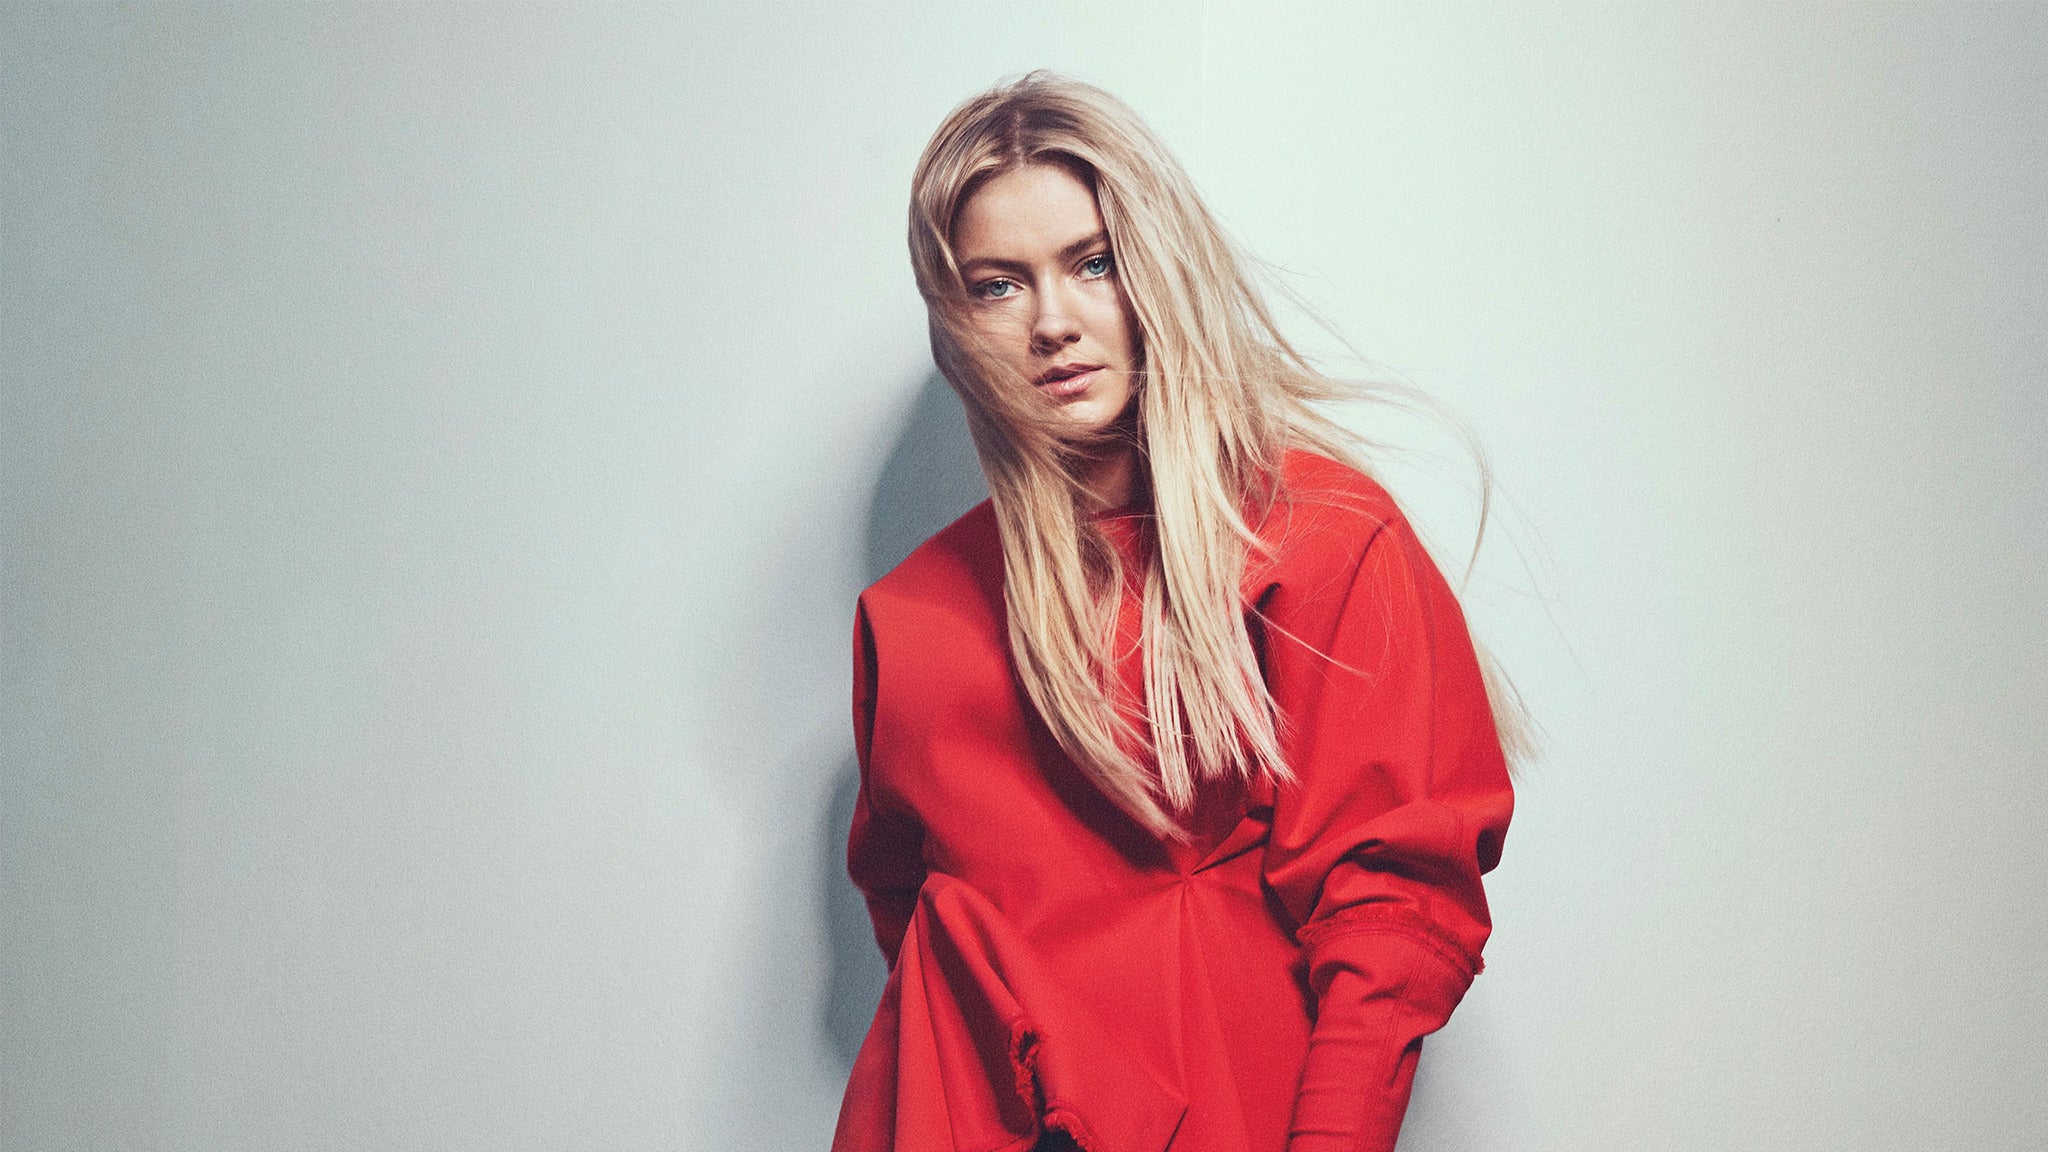 Astrid S in Columbus promo photo for Spotify presale offer code